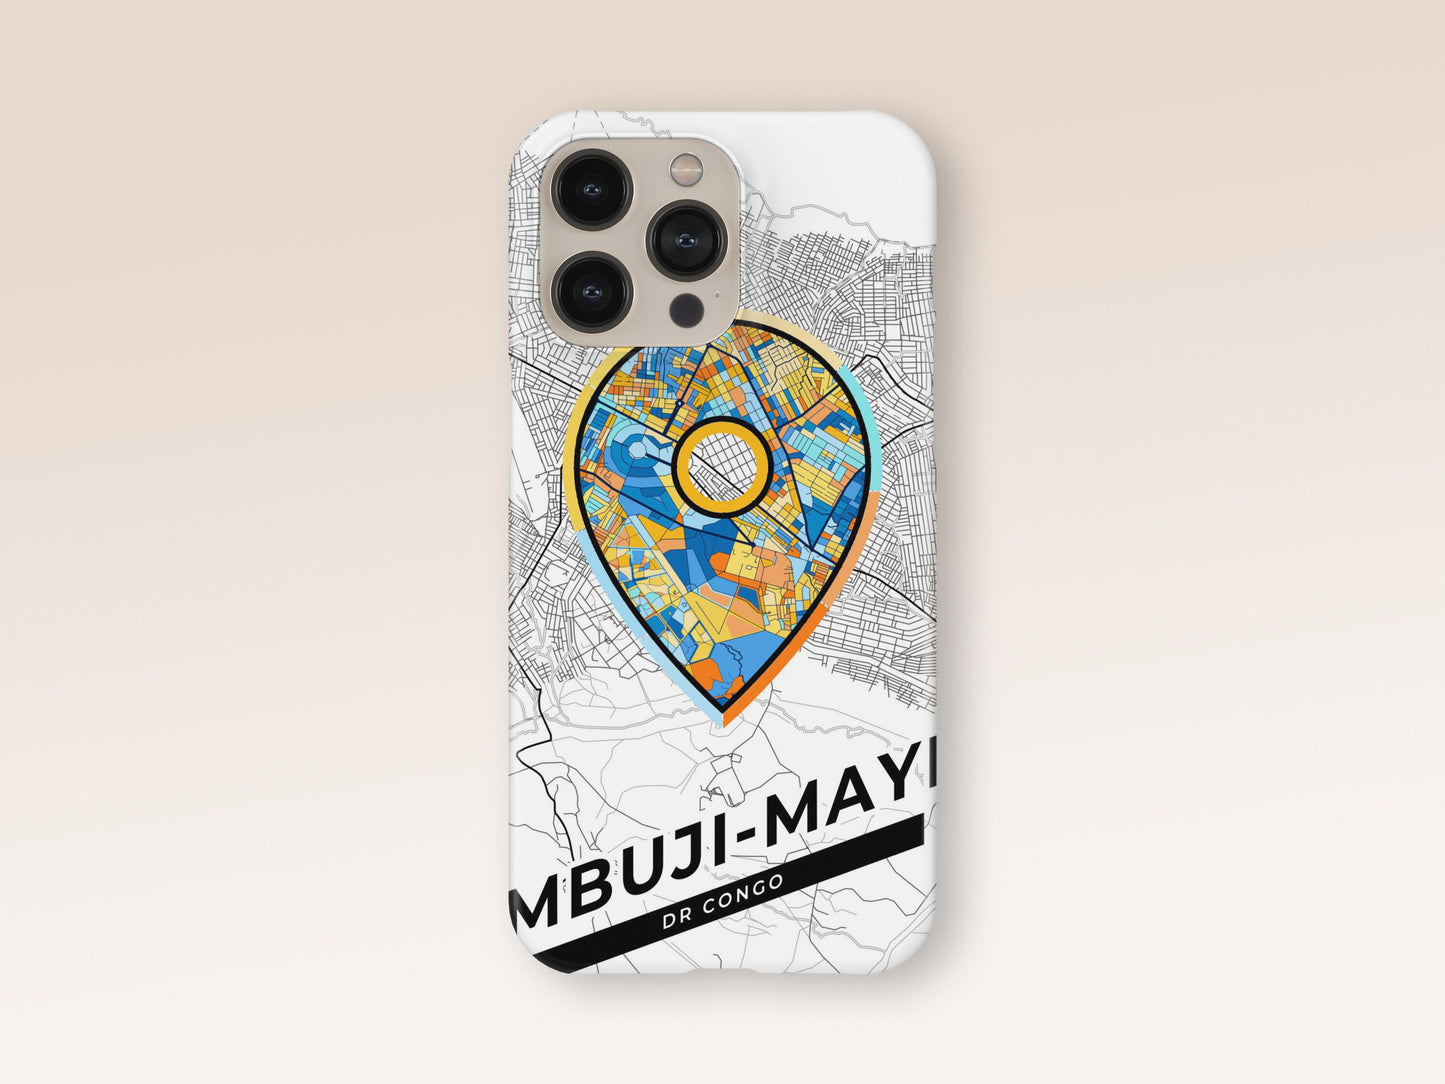 Mbuji-Mayi Dr Congo slim phone case with colorful icon. Birthday, wedding or housewarming gift. Couple match cases. 1